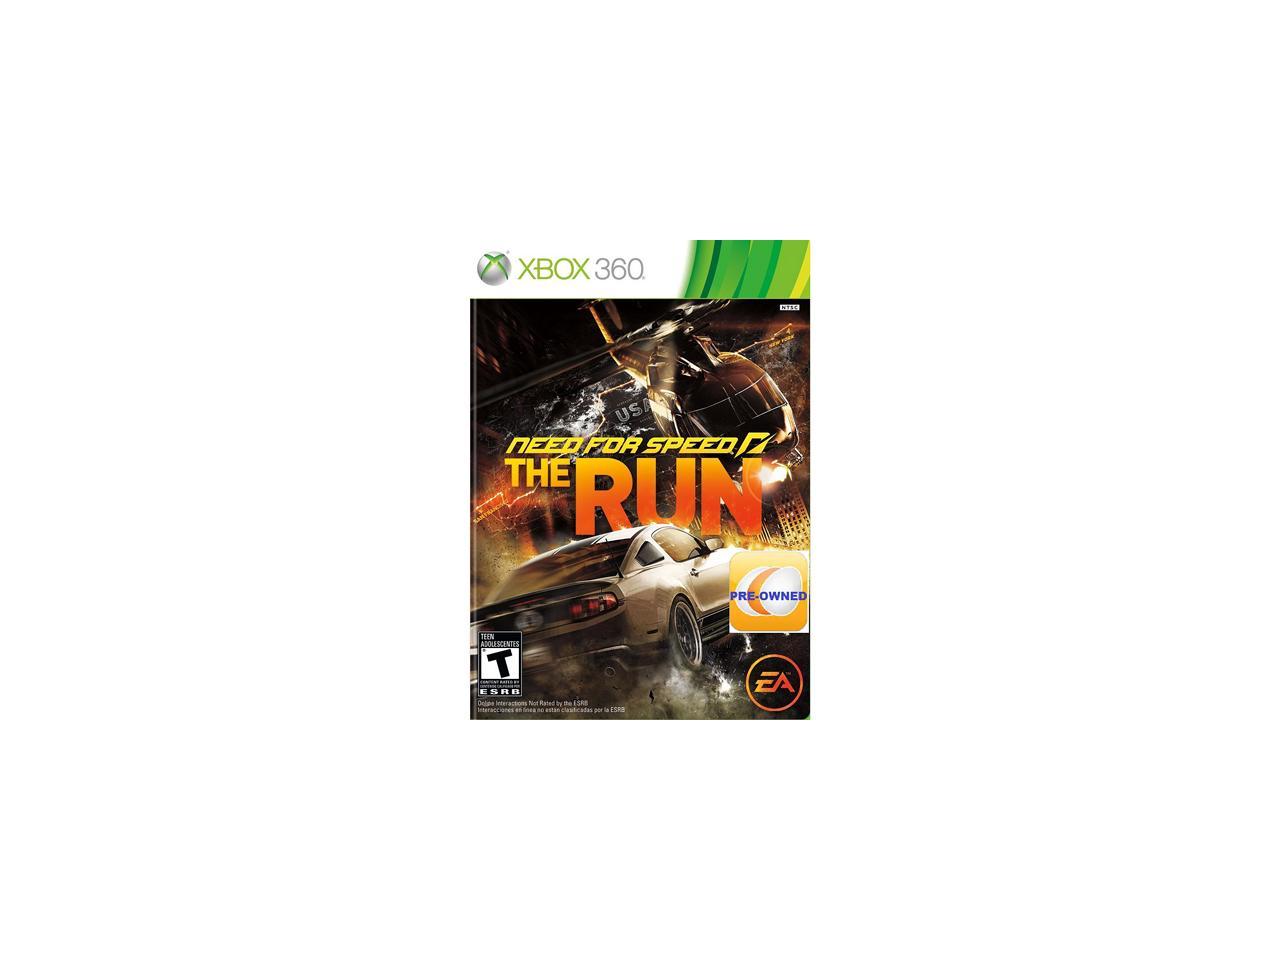 pre-owned-angry-birds-trilogy-xbox-360-newegg